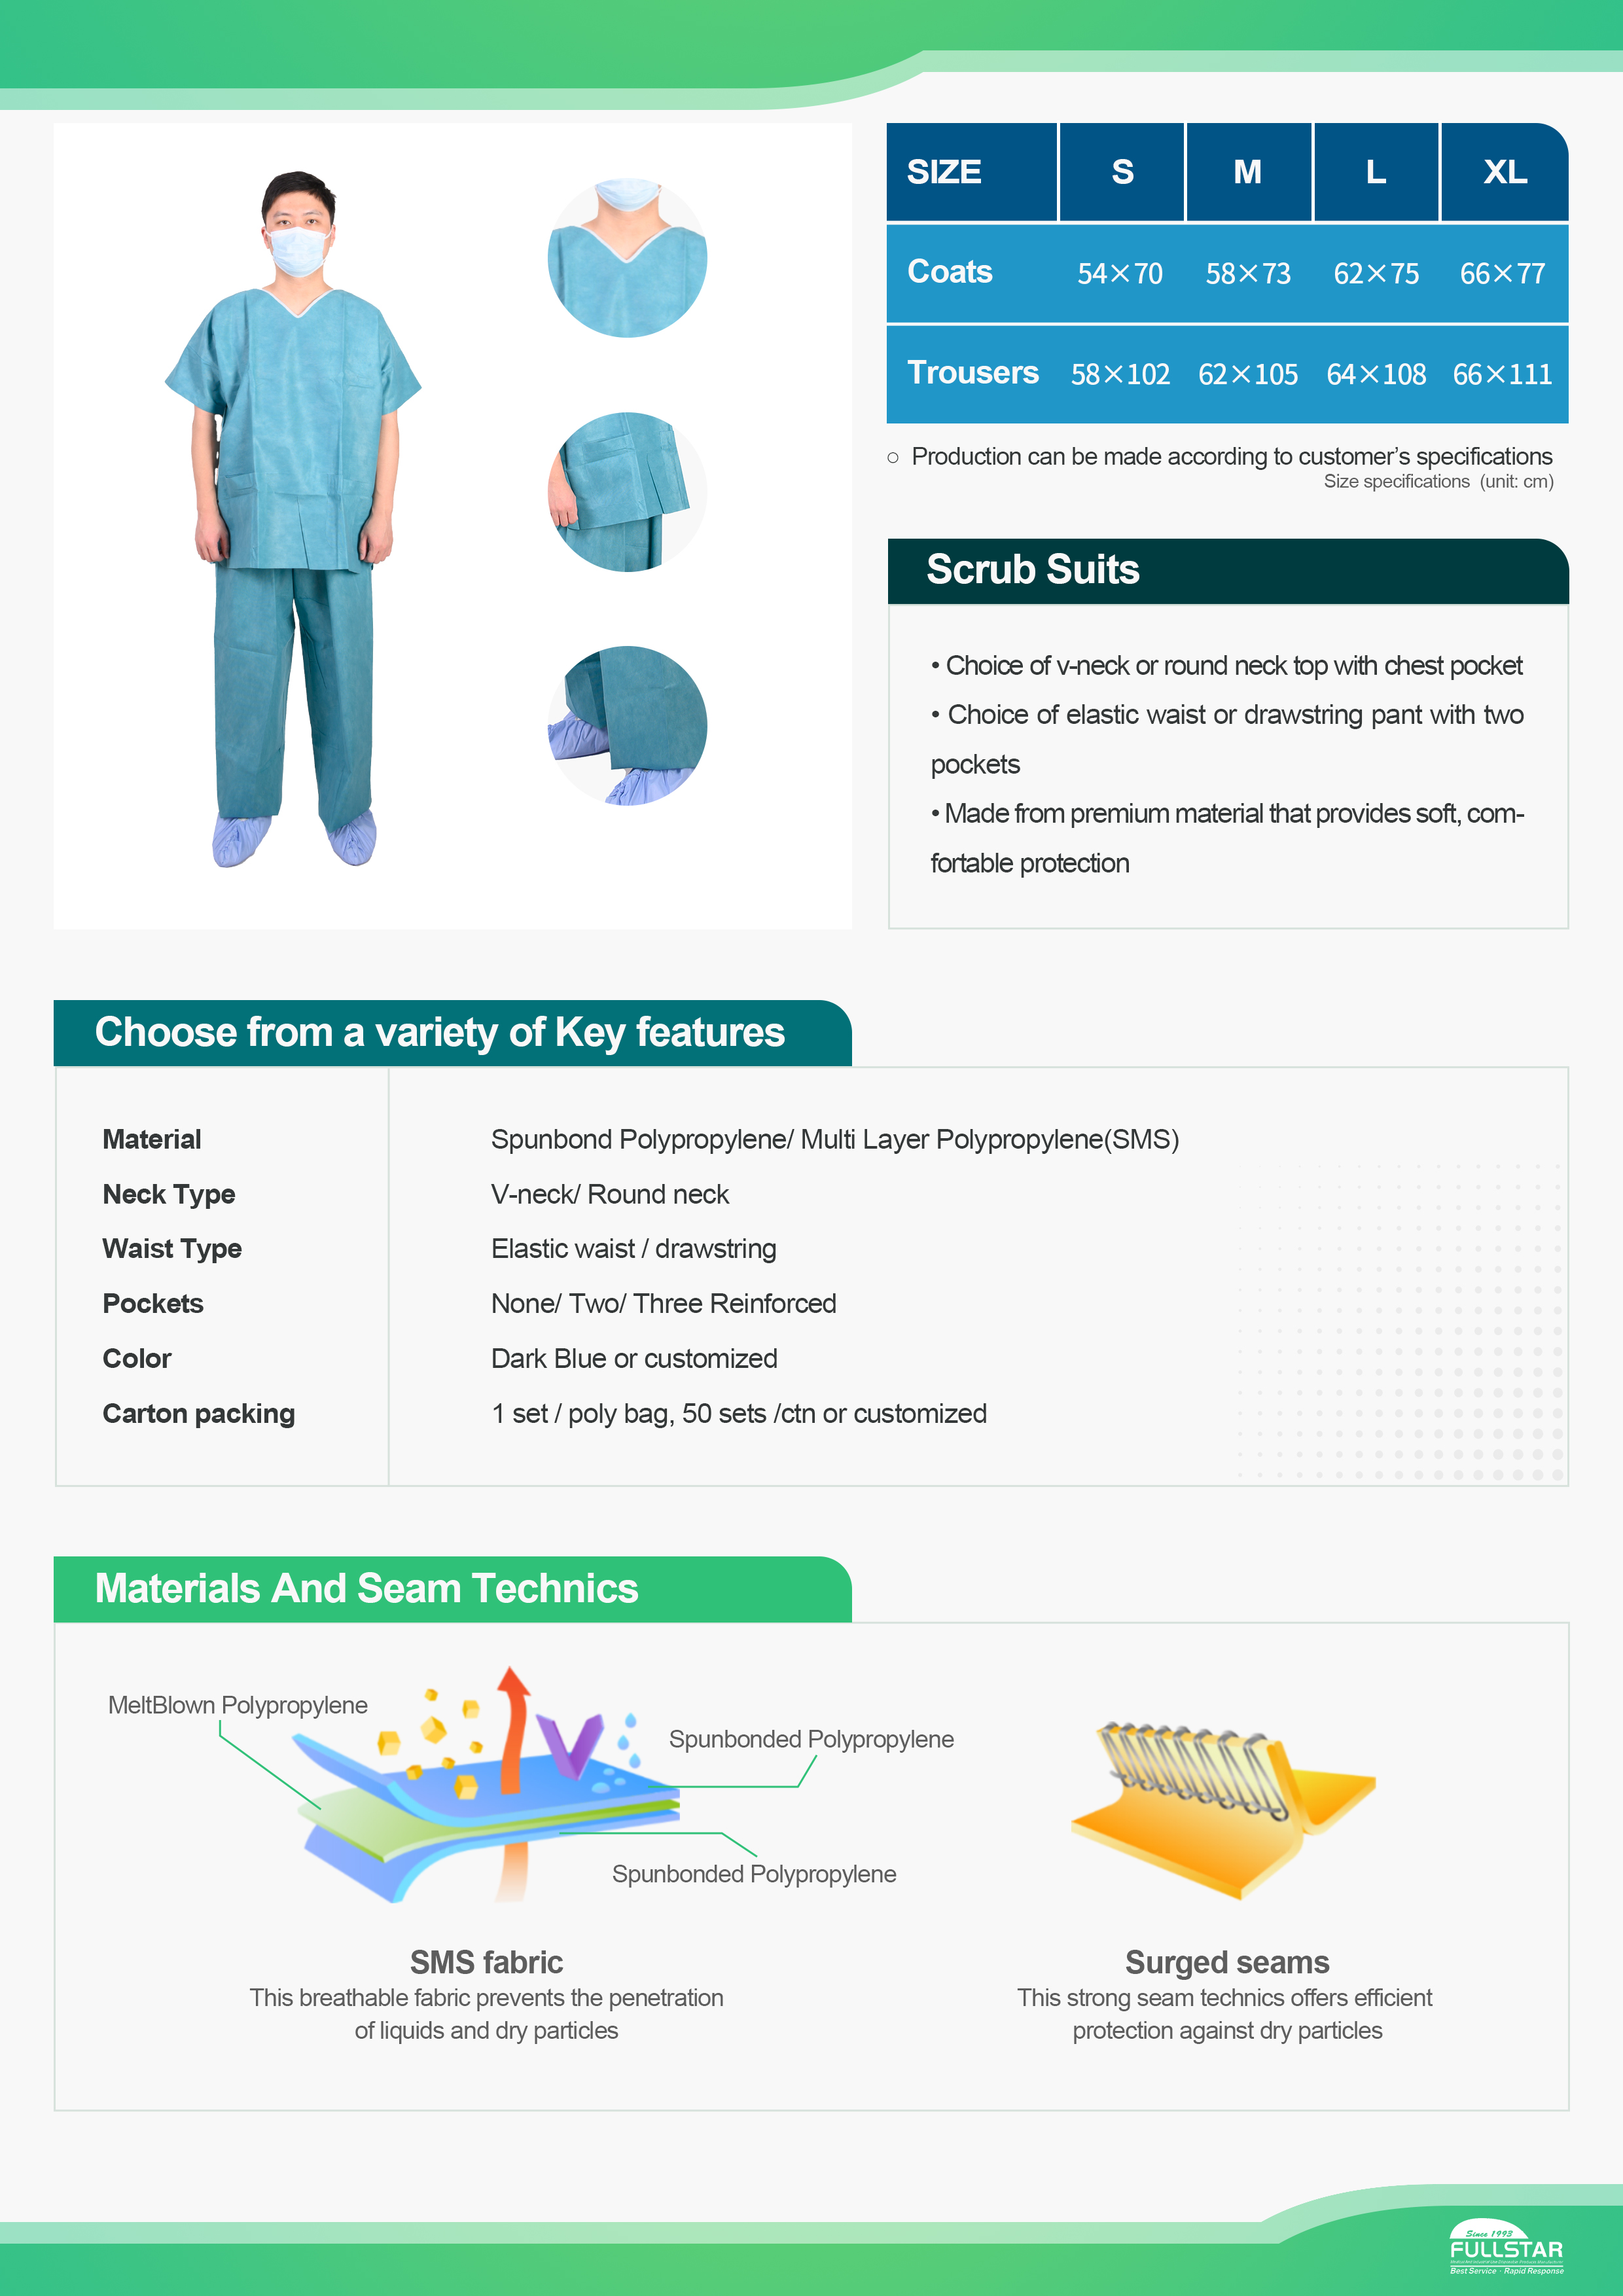 Disposable Medical PP Scrub Suit